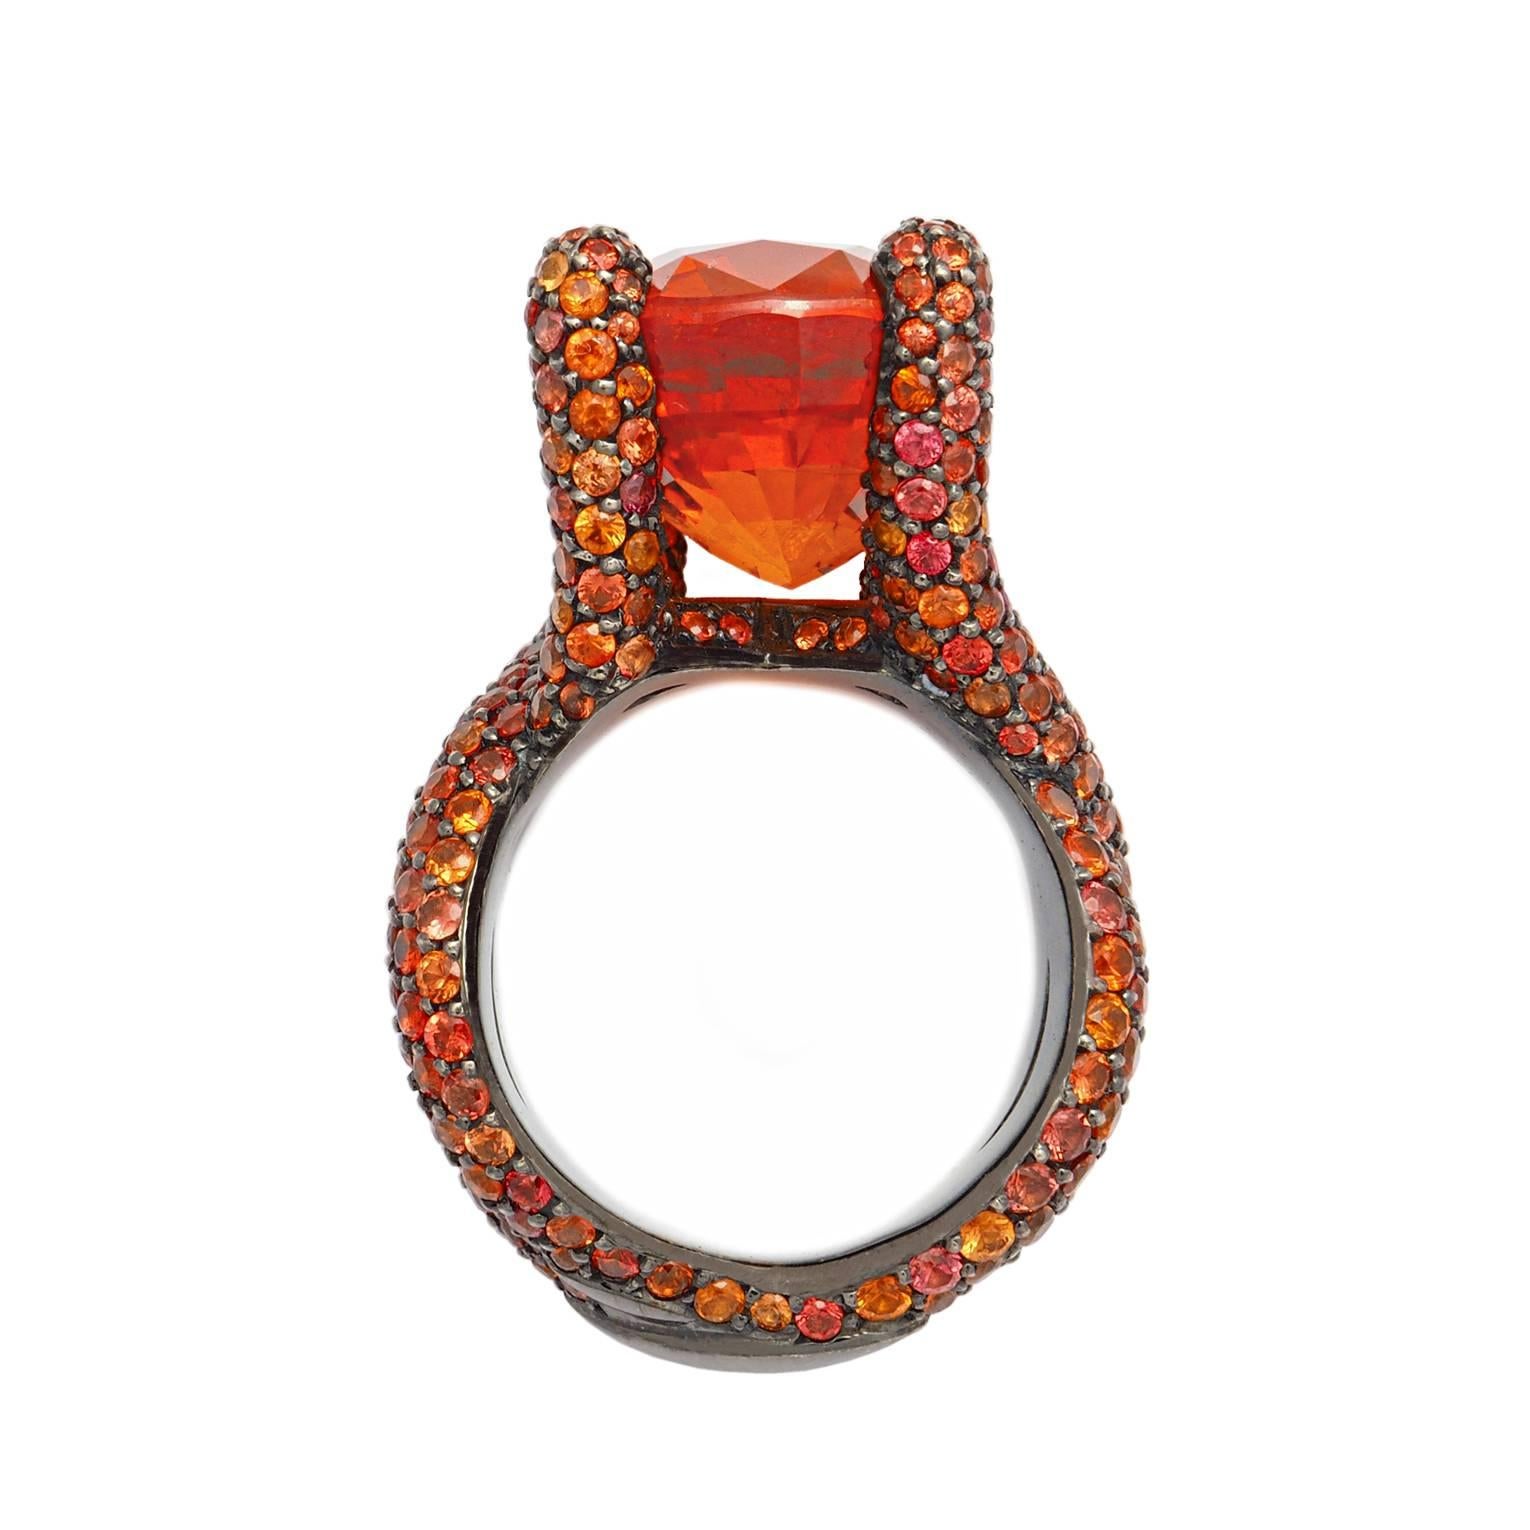 This spectacular Cocktail ring, is set in 18k blackened white gold paved with 412 intense orange Sapphires 9.1 ct and a magnificiant mandarine garnet 26.0 ct in the front. It is designed by Colleen B. Rosenblat. 